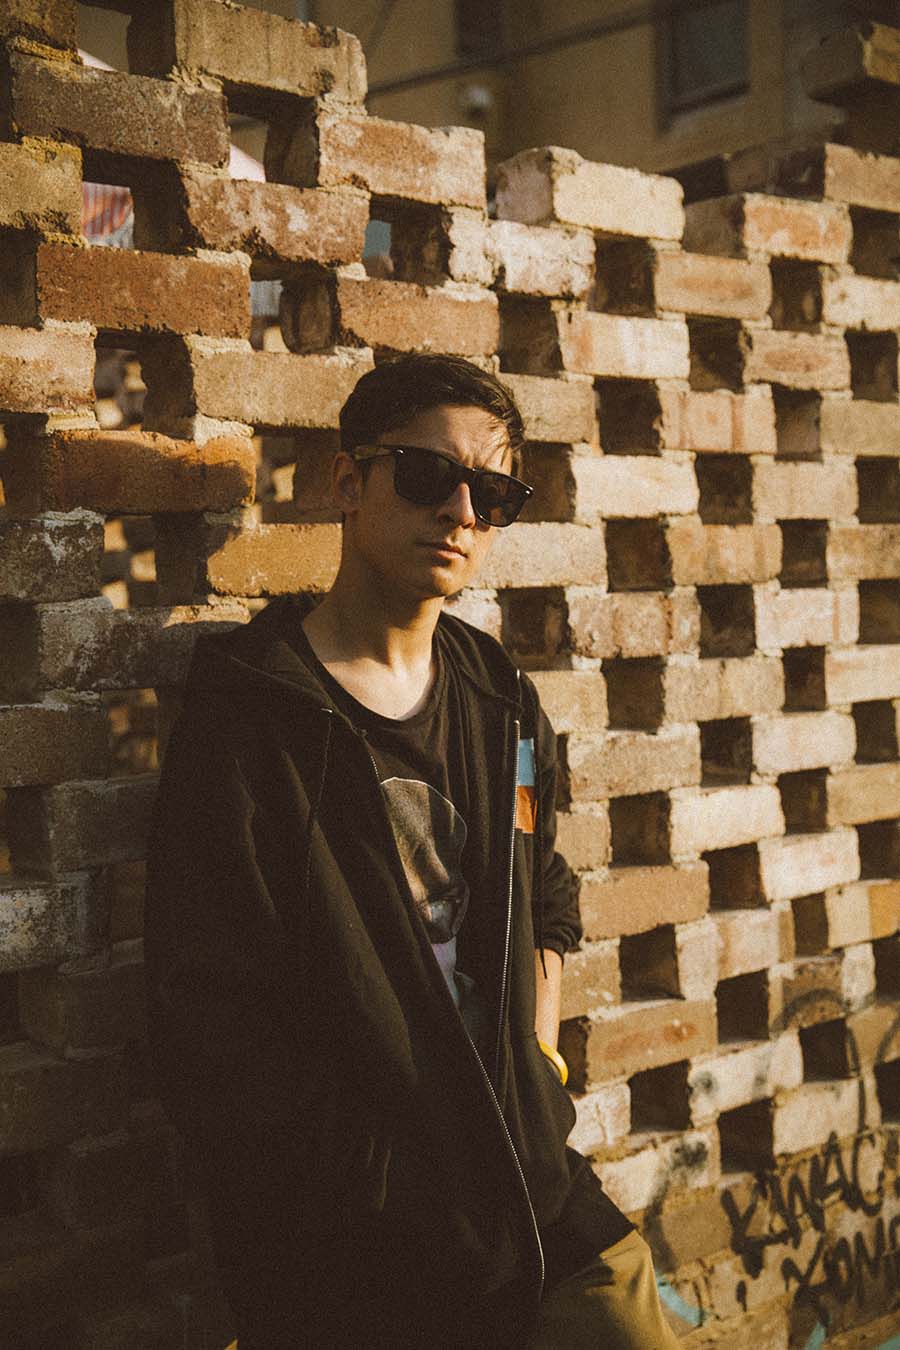 Sydney rapper Dobby on the pressure you face at the epicentre of ...